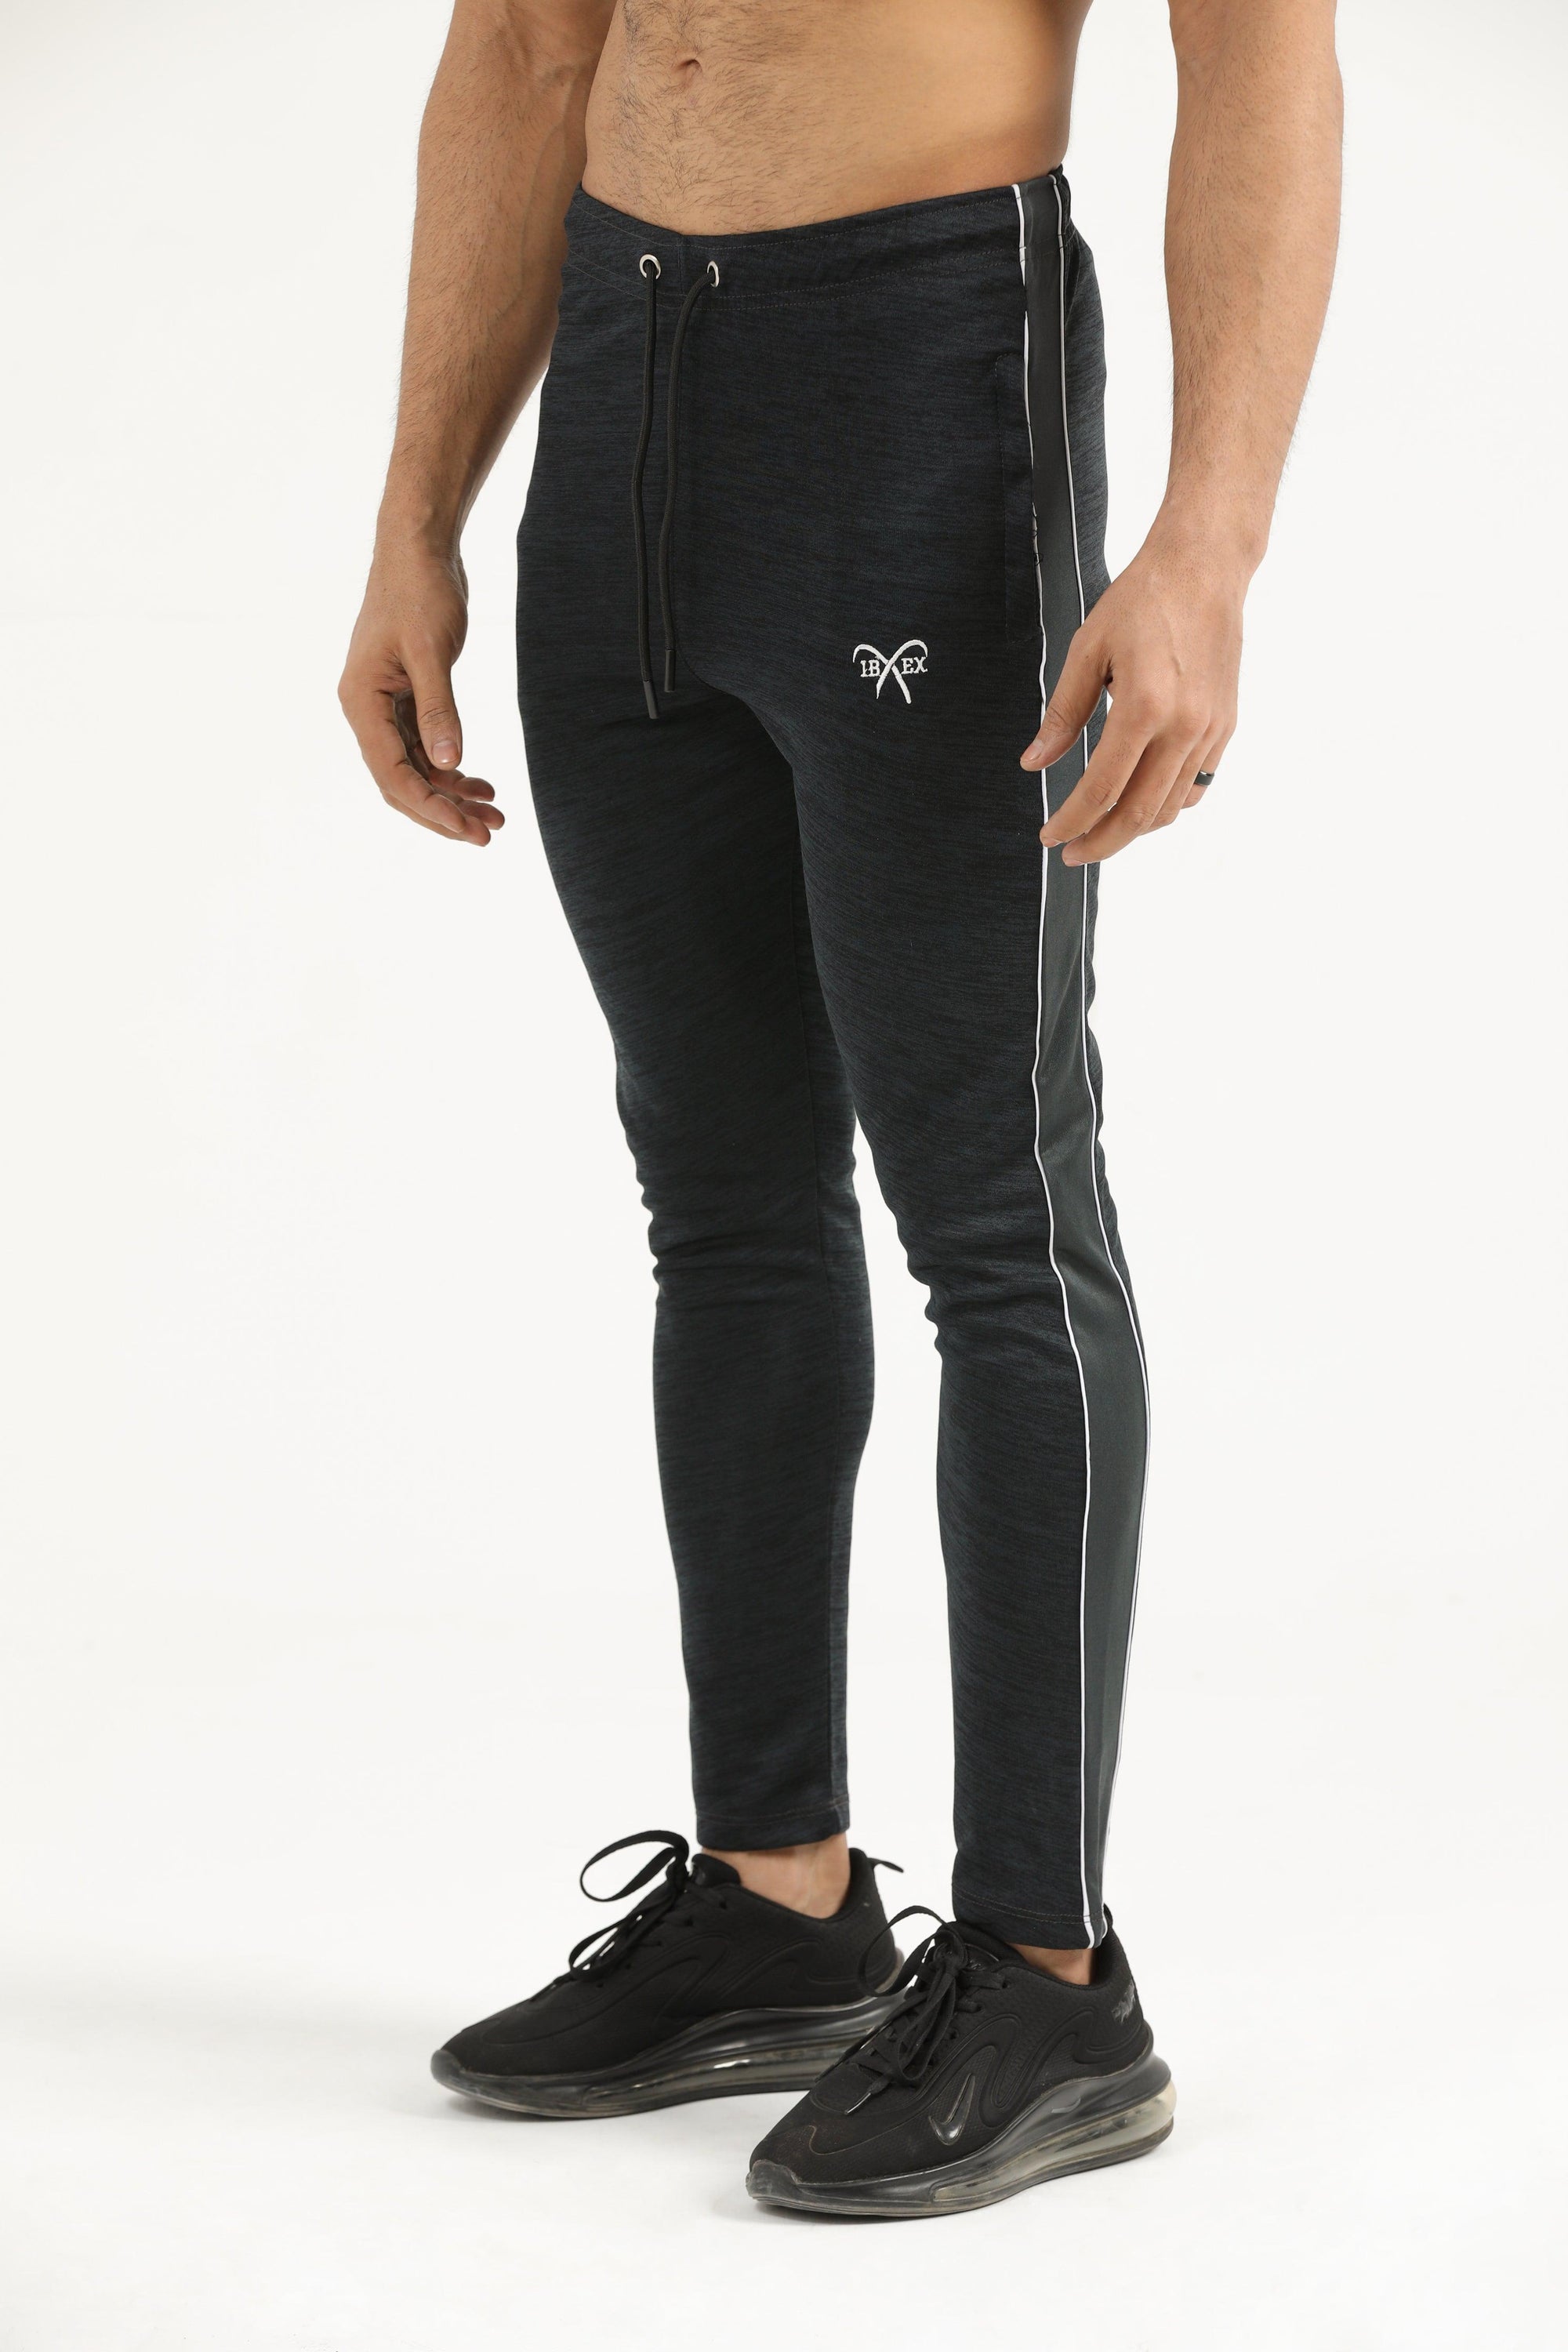 Charcoal Interlock trouser with Grey Side Panel